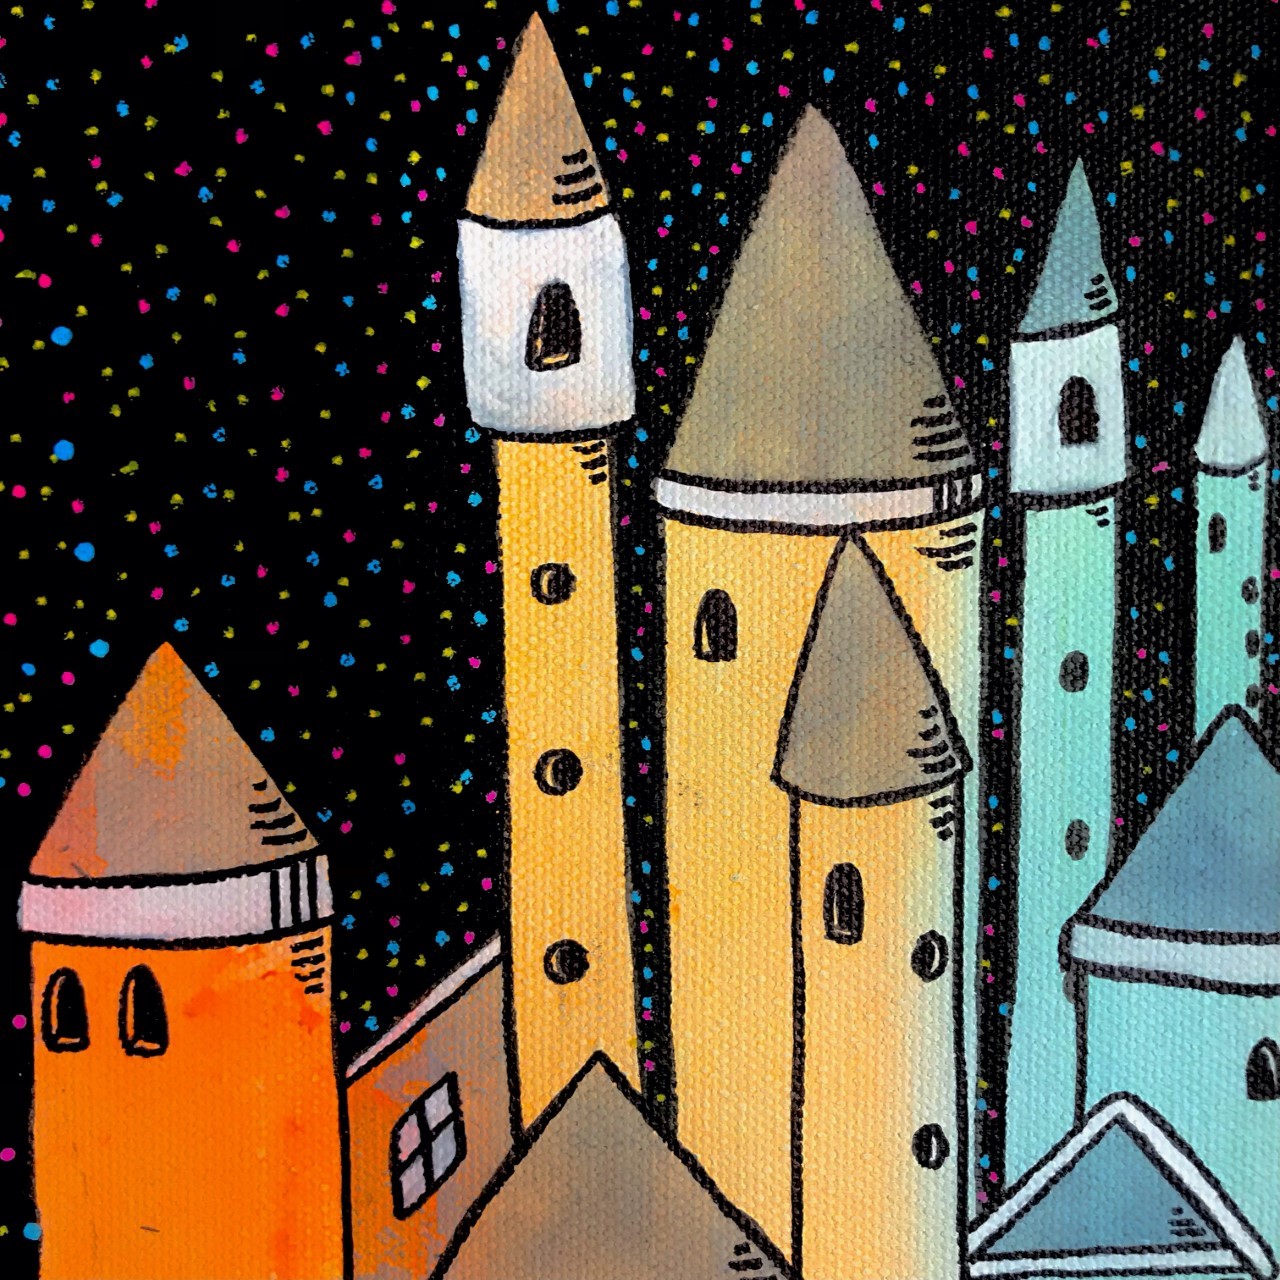 Multicolored castle towers on black background with multicolored dots on it